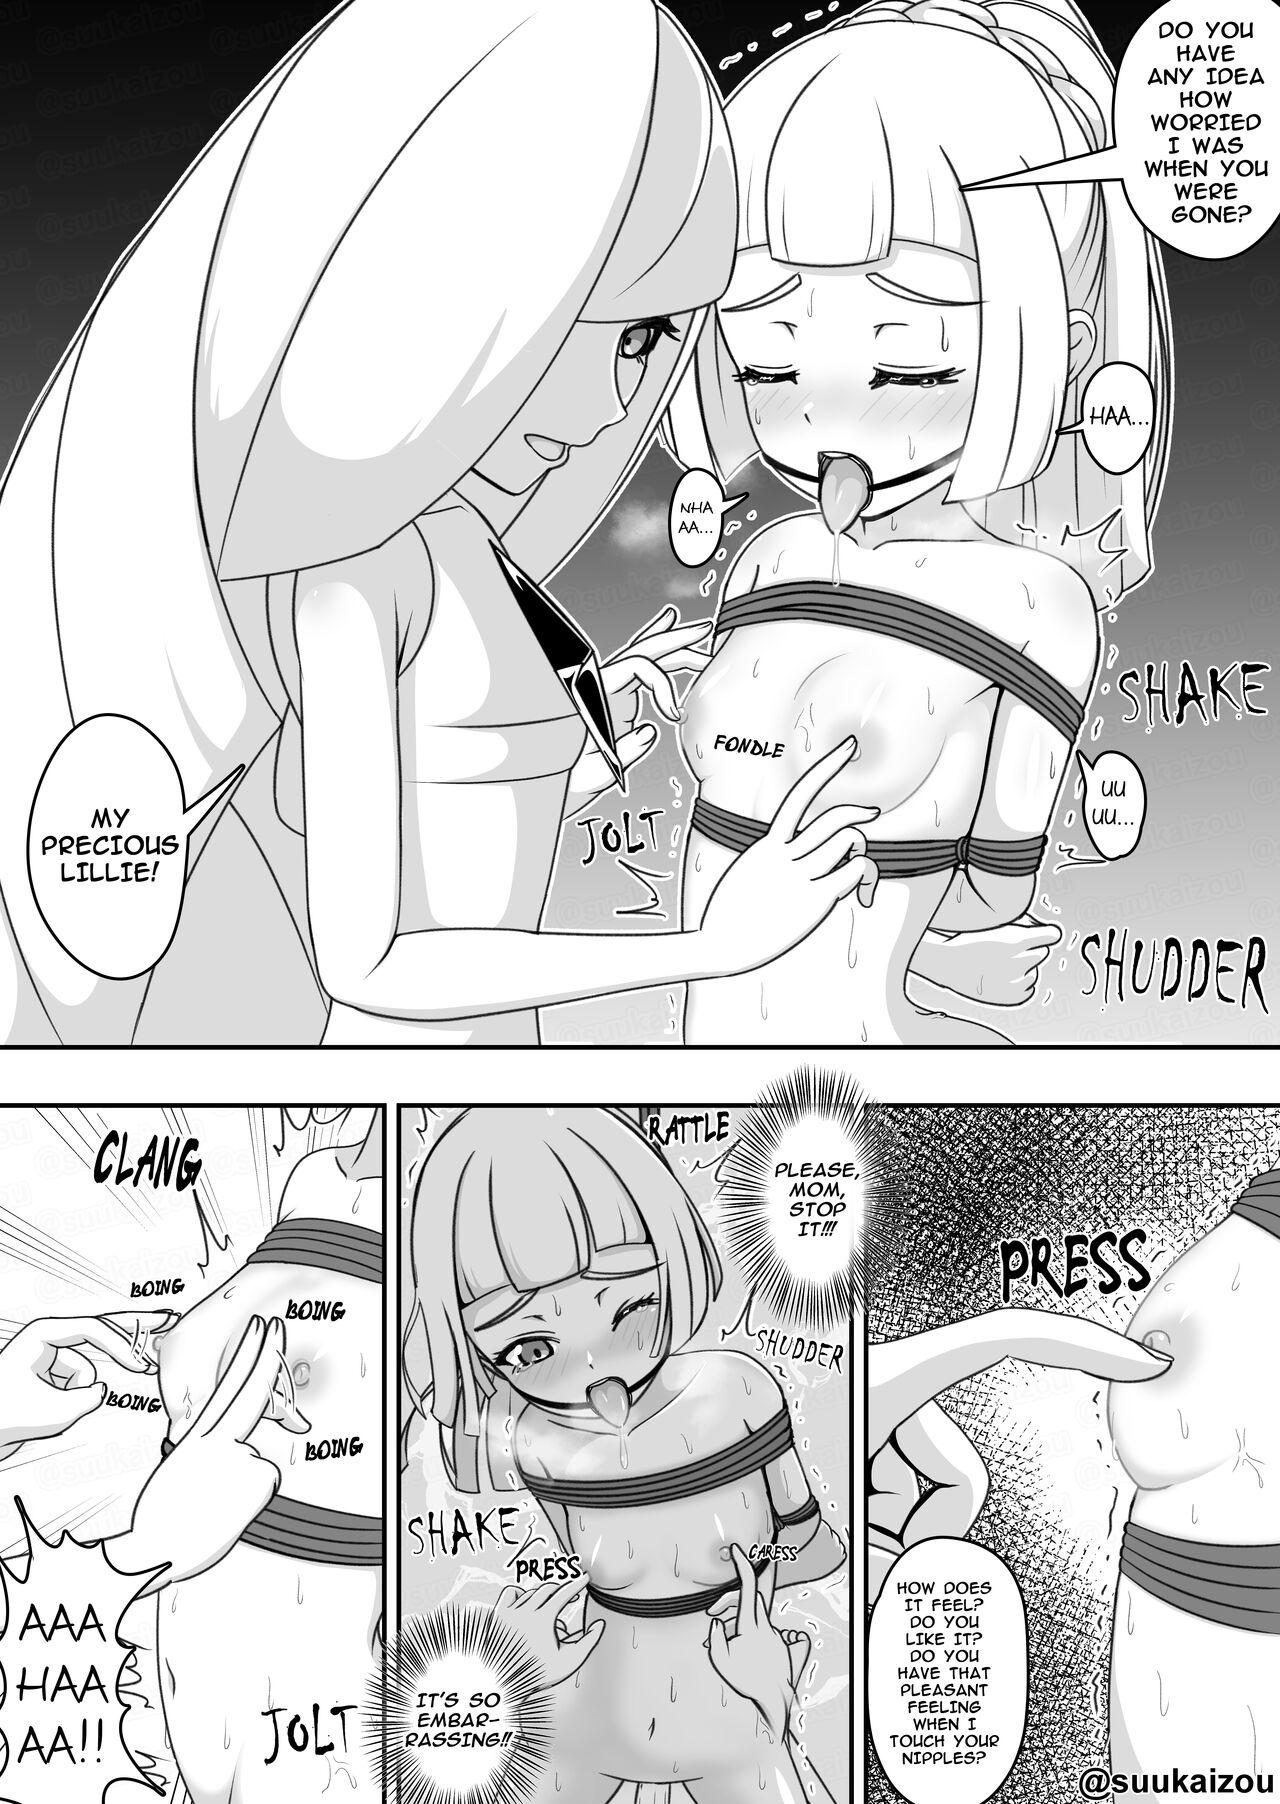 Web Lillie gets spanked by Lusamine. - Pokemon | pocket monsters Chastity - Picture 2